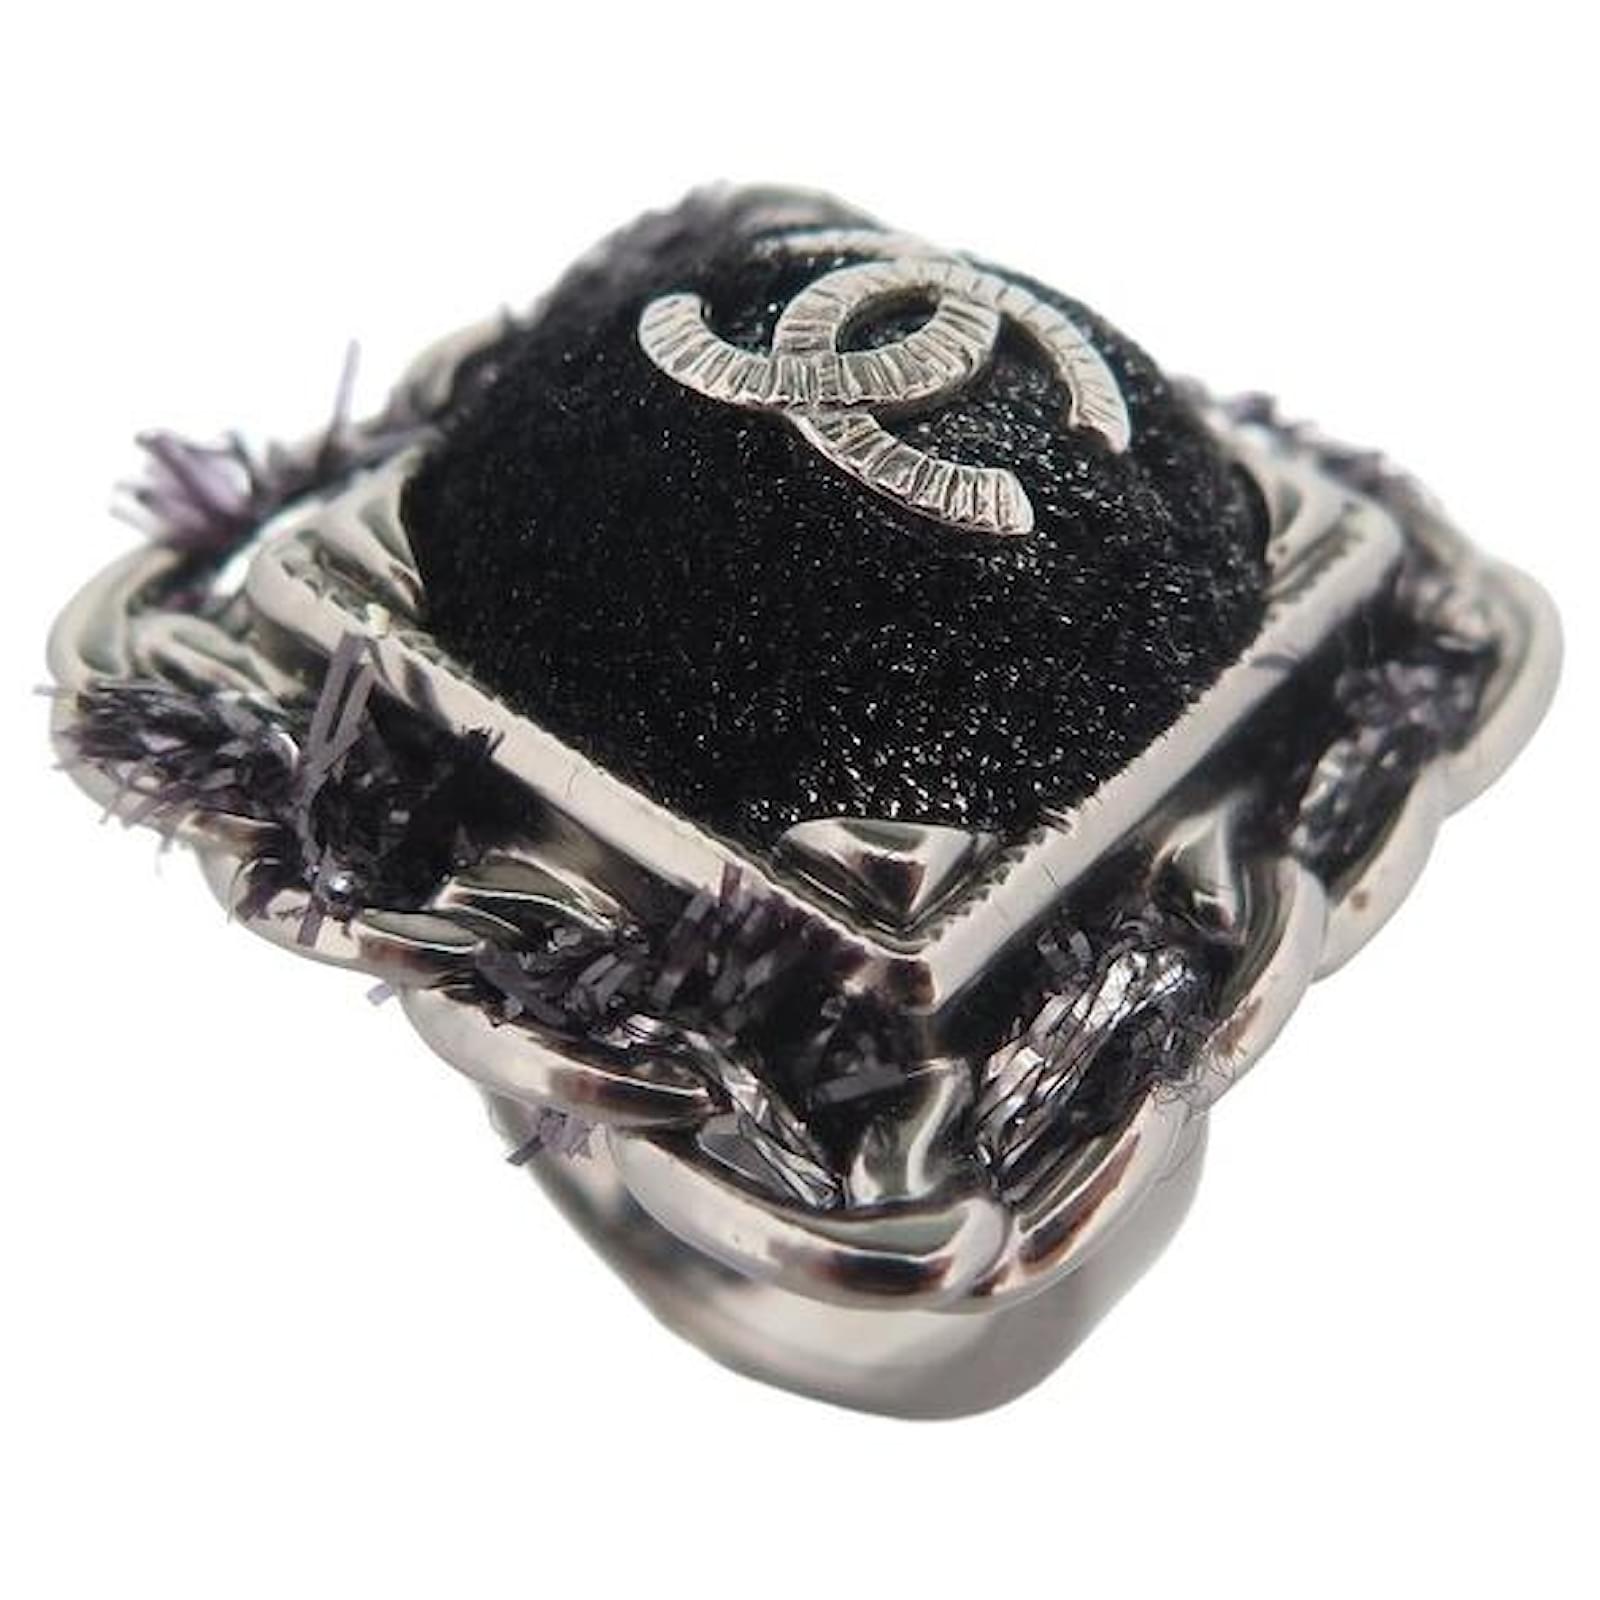 Rings Chanel Chanel CC Logo Square Ring Size 50 in Black Metal 2013 Black Ring